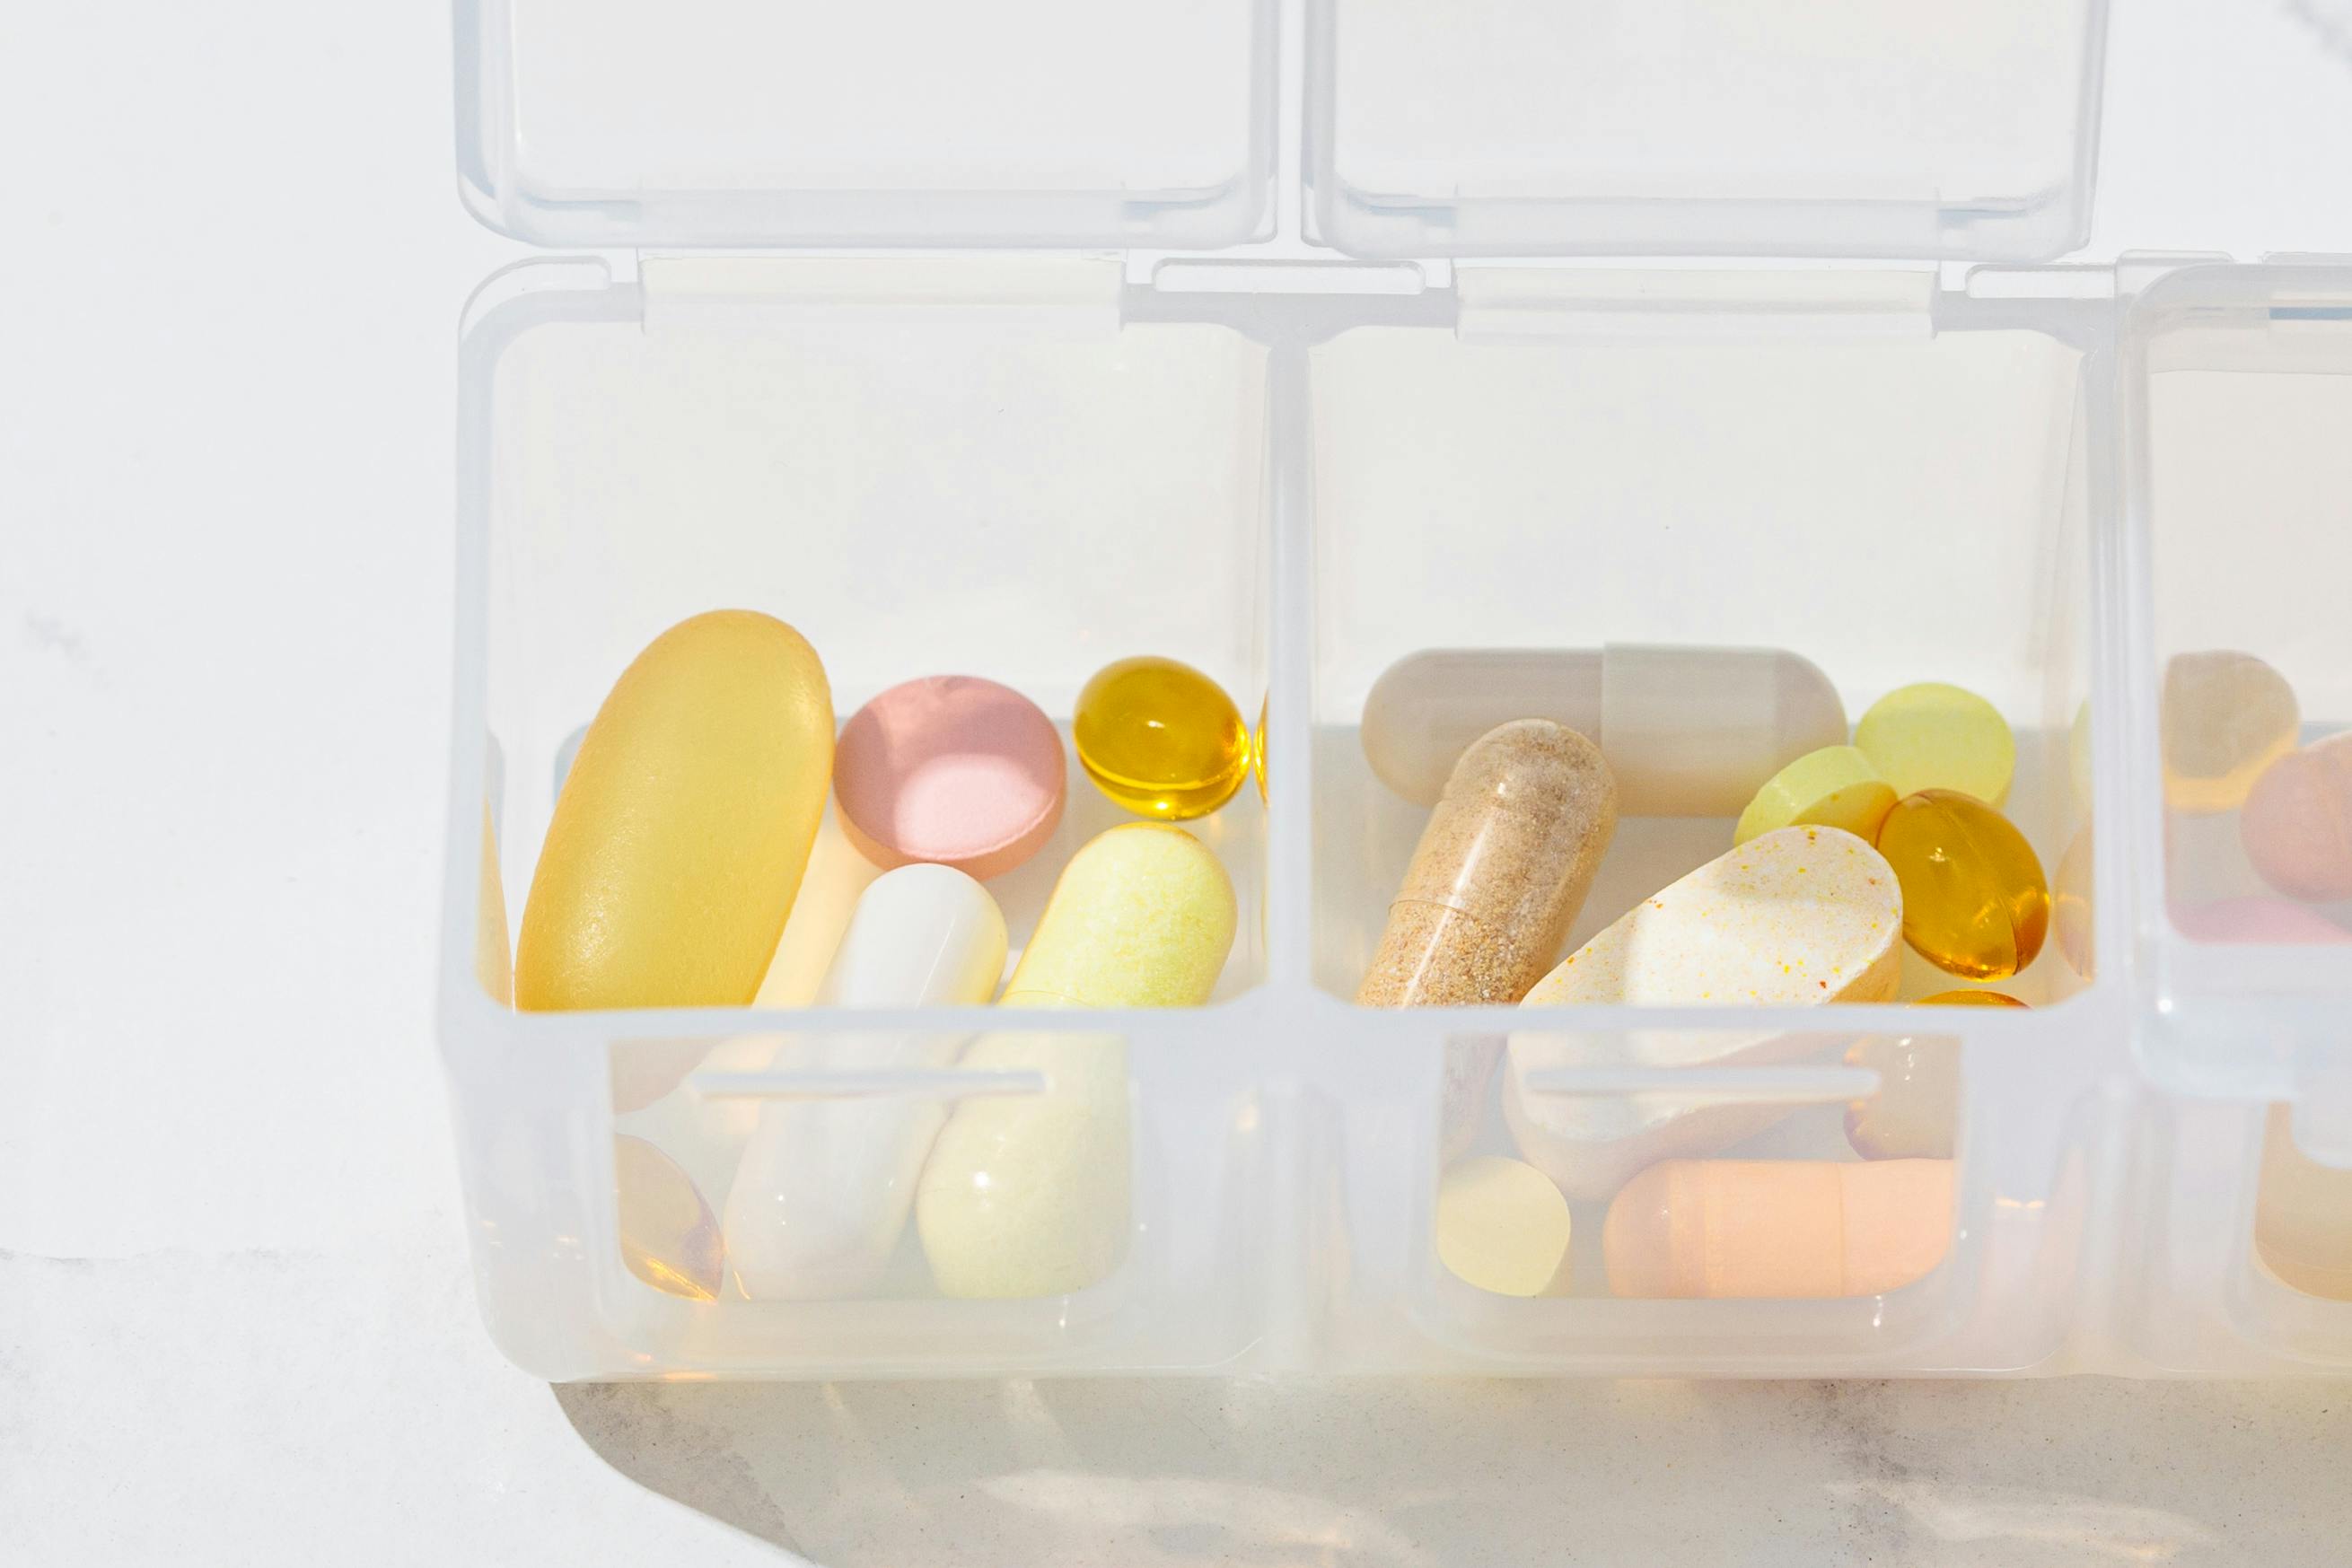 Are pill organizers really safe? Challenges and solutions